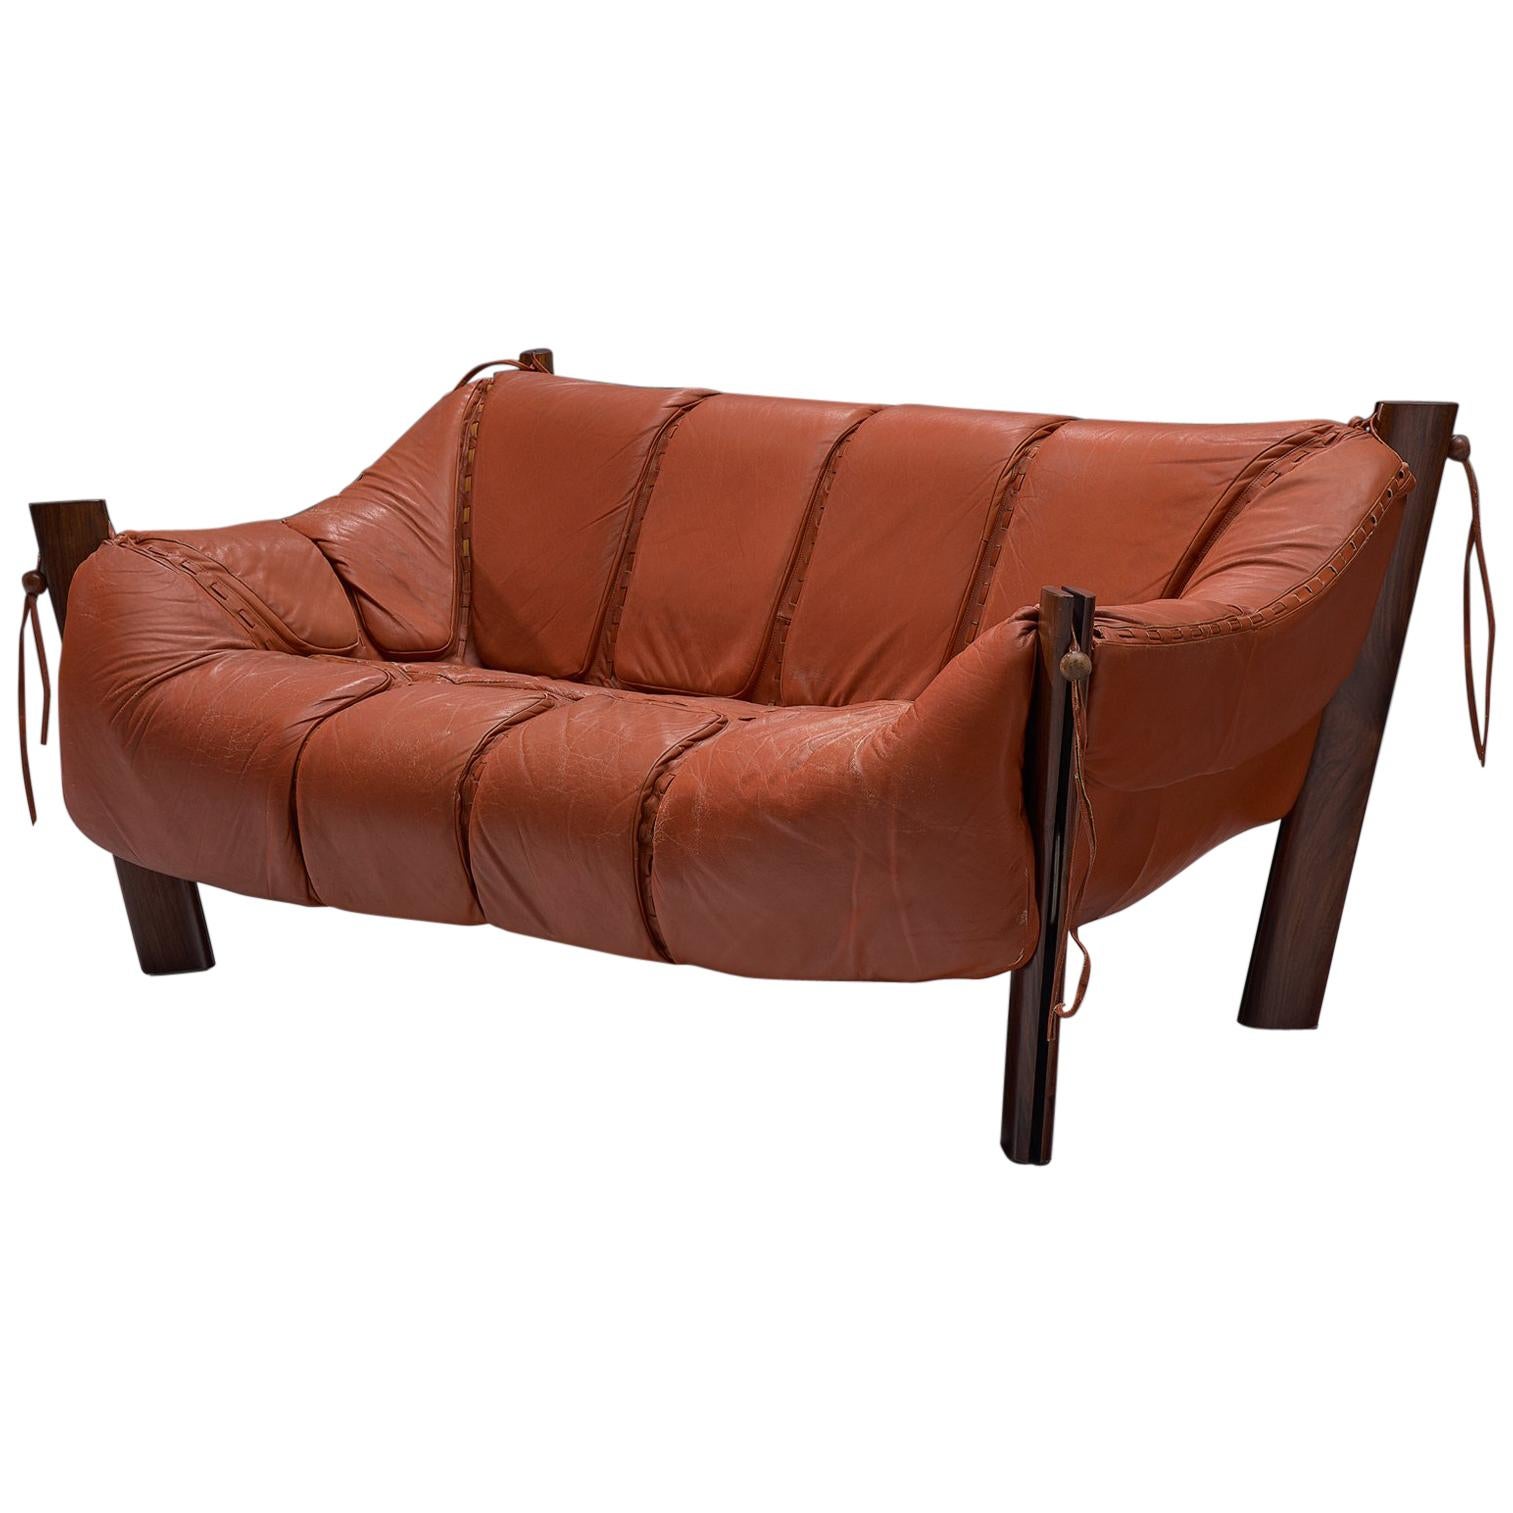 Percival Lafer Two-Seat Sofa in Rosewood and Red Leather